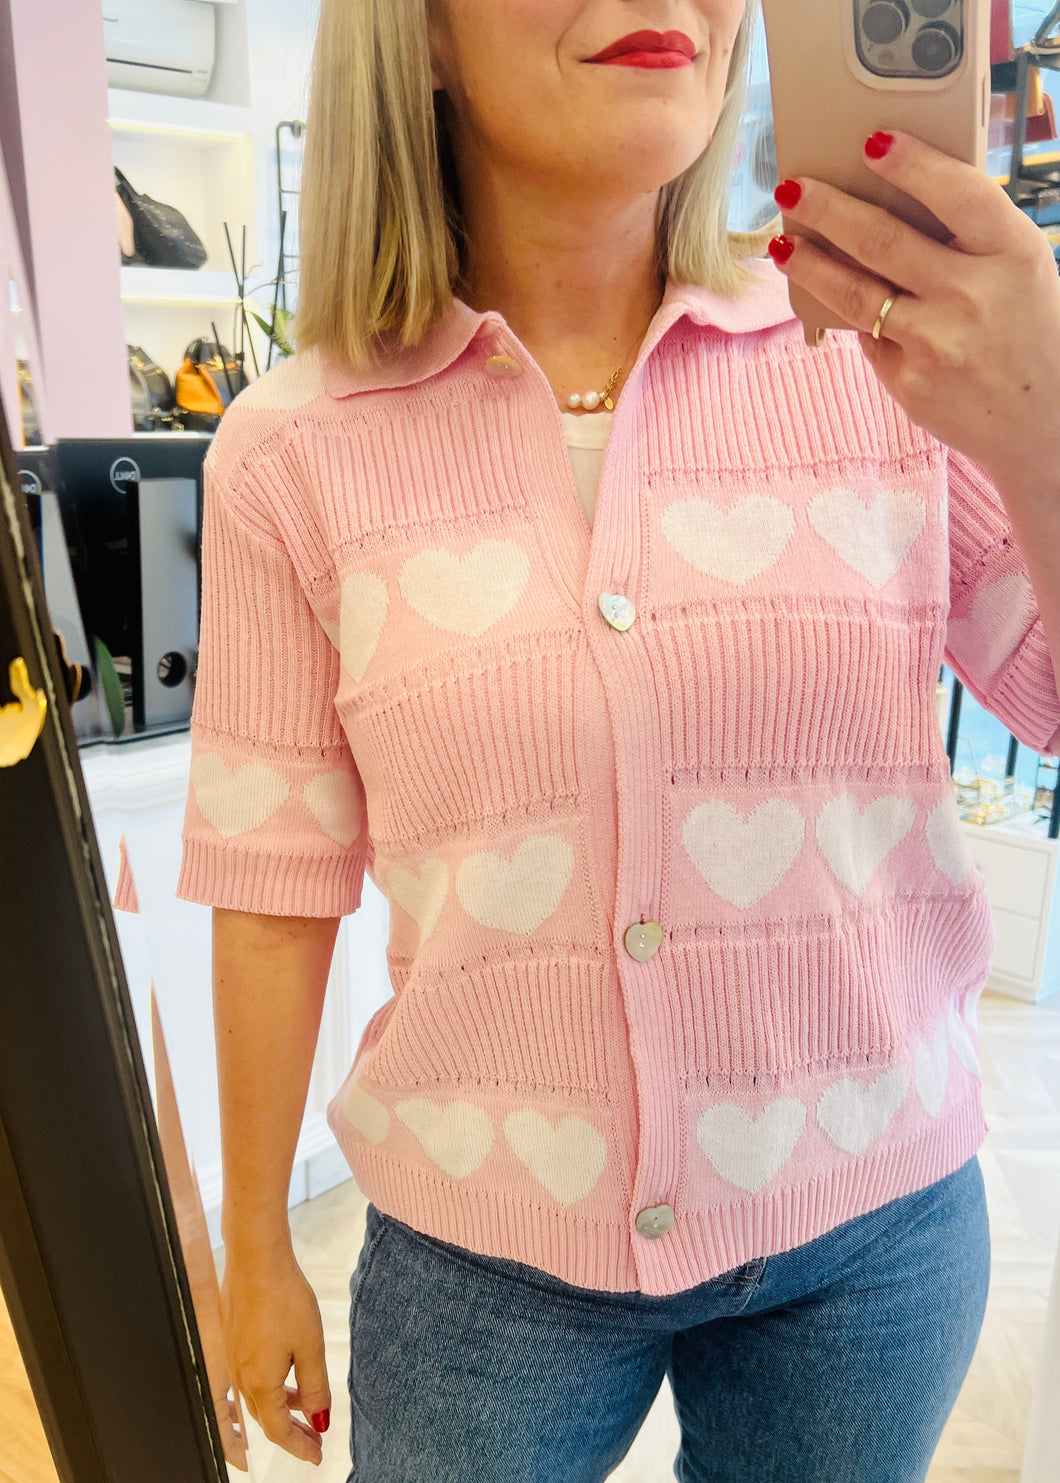 Cardigan Polo Hearts (Pink) COMBOS